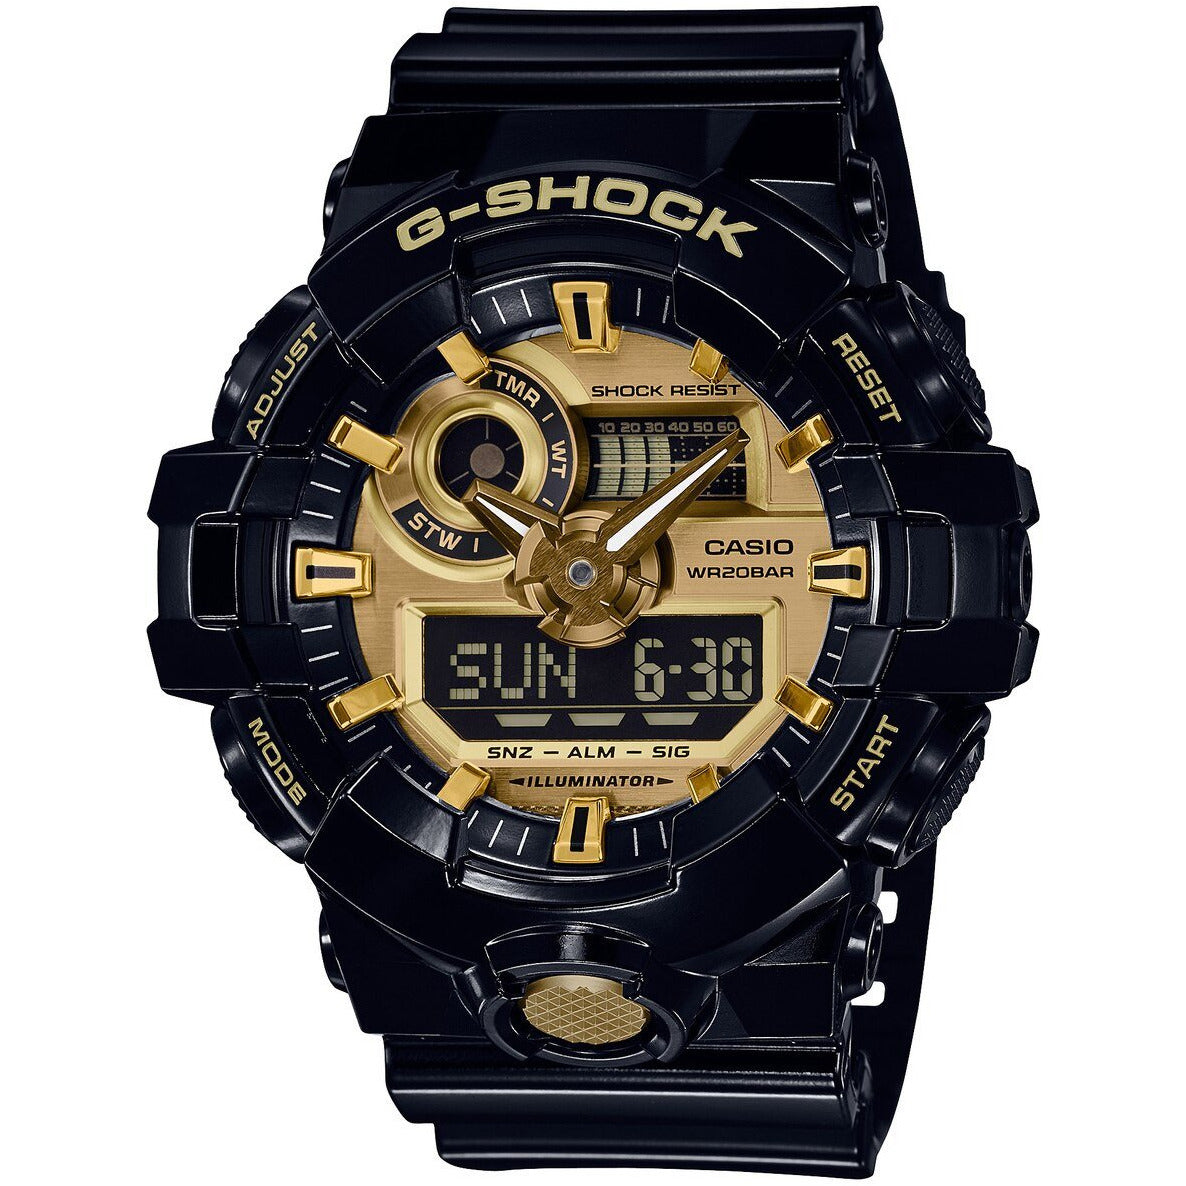 black and gold g shock watch